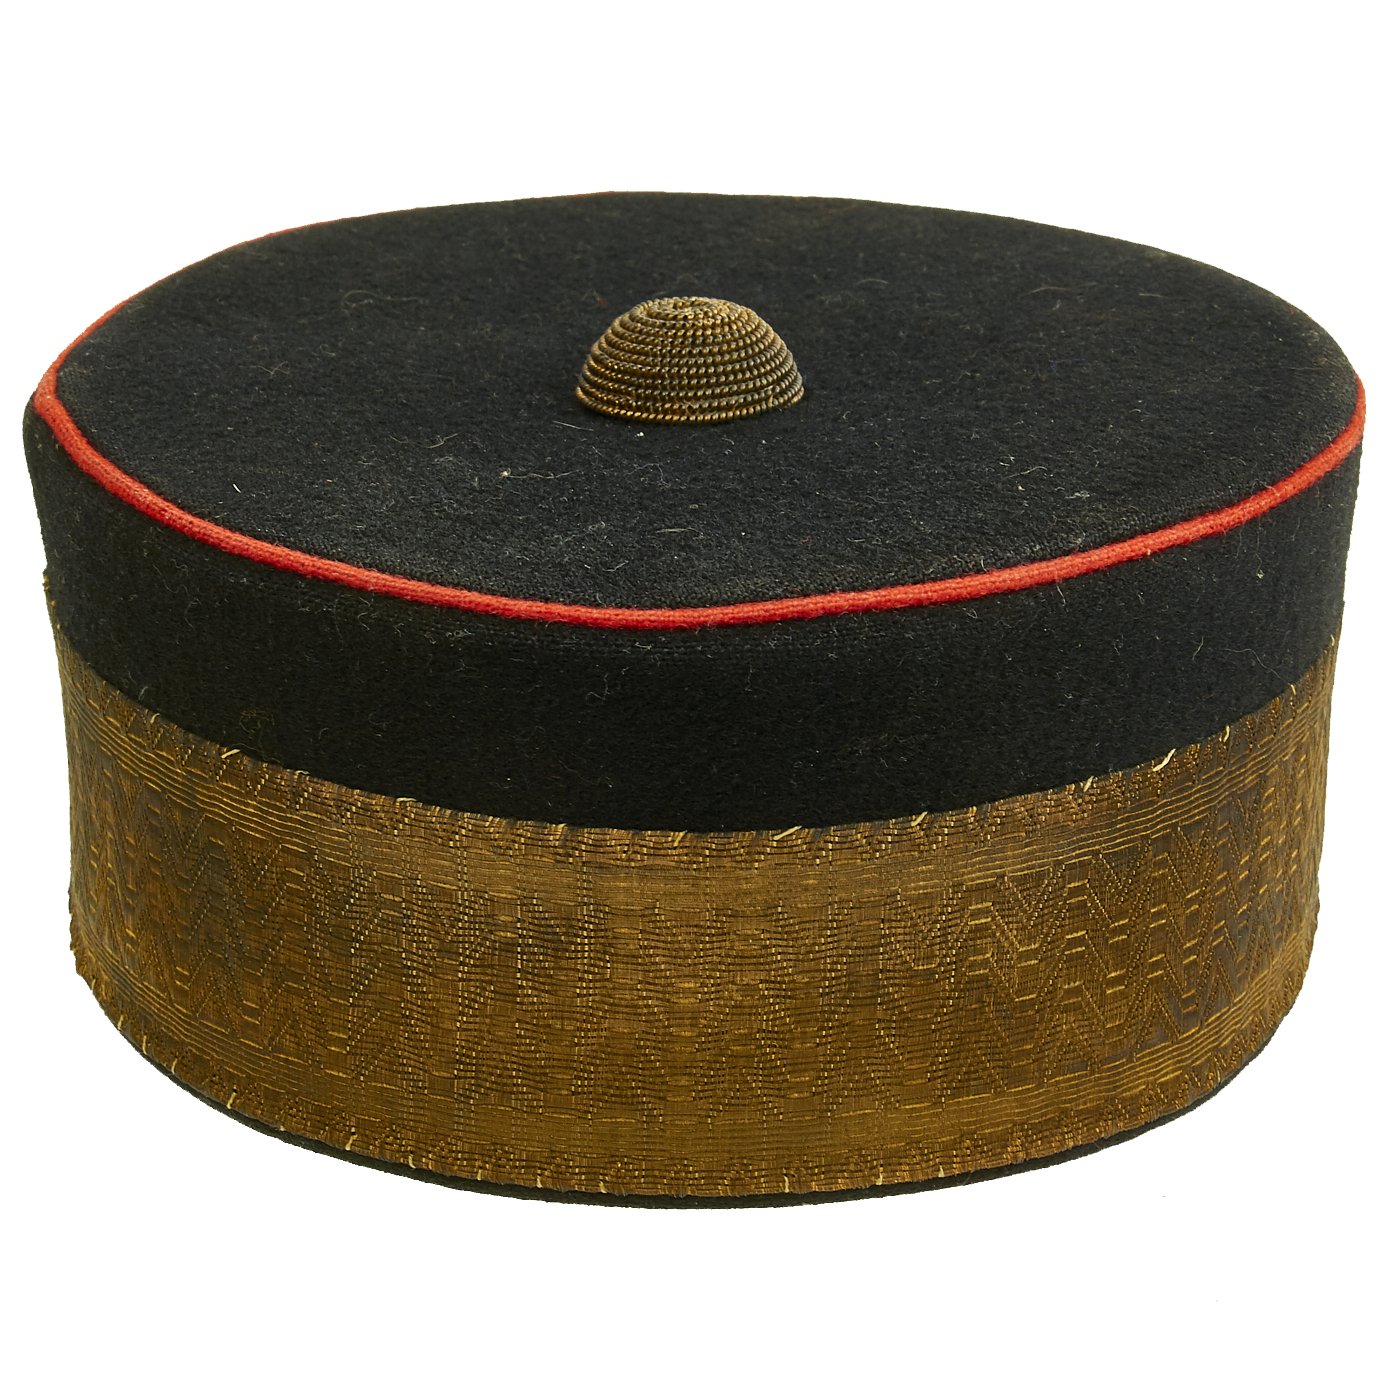 Mounties hat in antique hat box - general for sale - by owner - craigslist